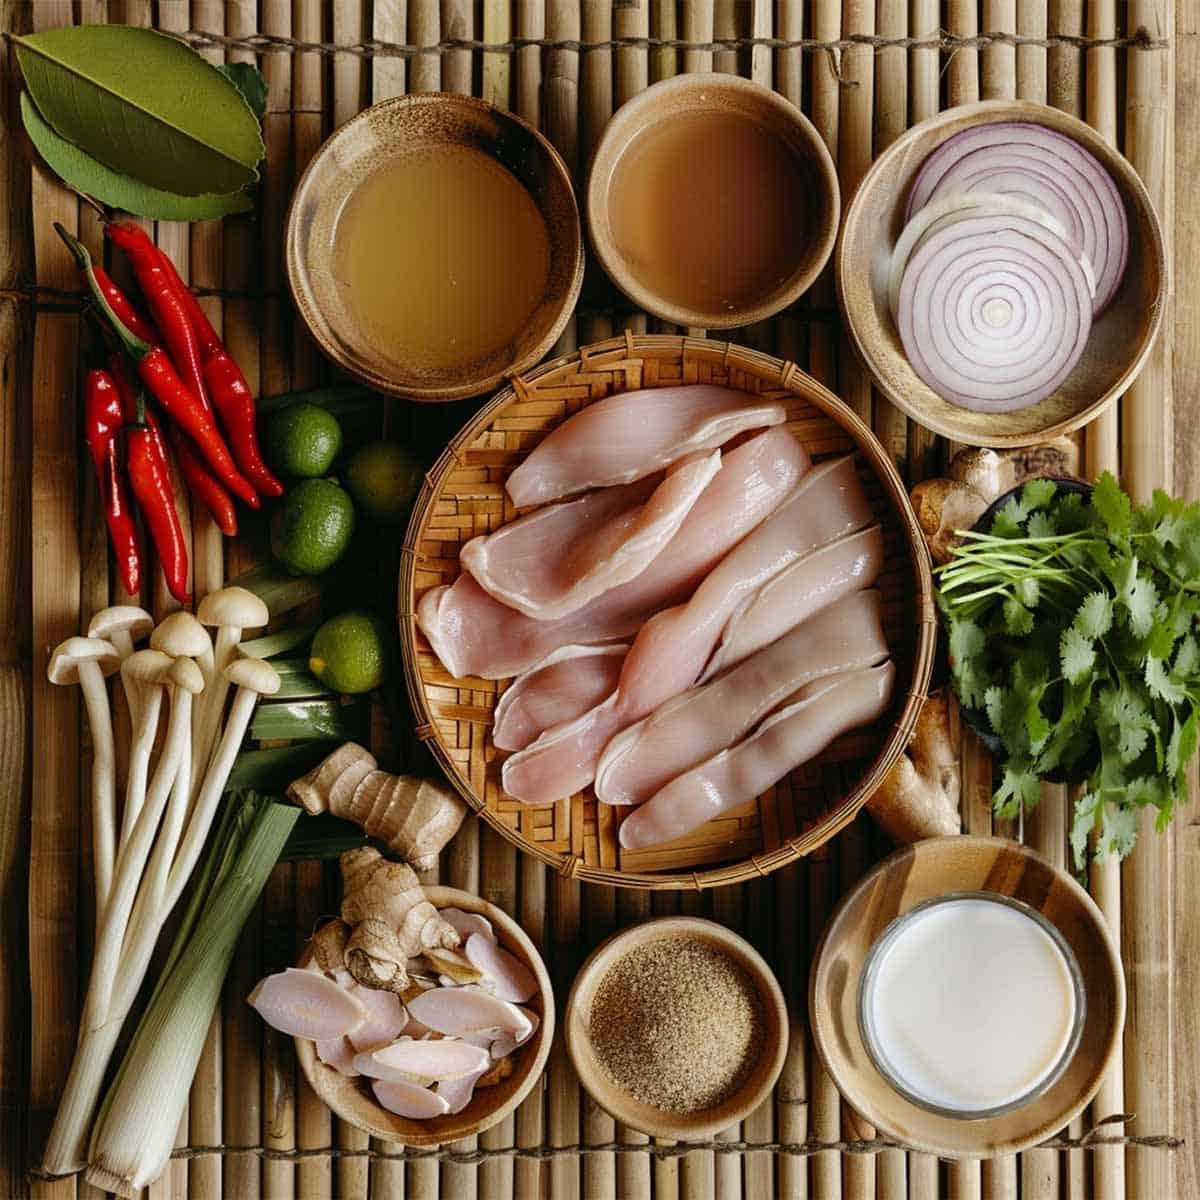 Ingredients for Thai Coconut Chicken Soup (Tom Kha Gai) laid out for a recipe, including coconut milk, chicken, mushrooms, lemongrass, galangal, kaffir lime leaves, and chilies